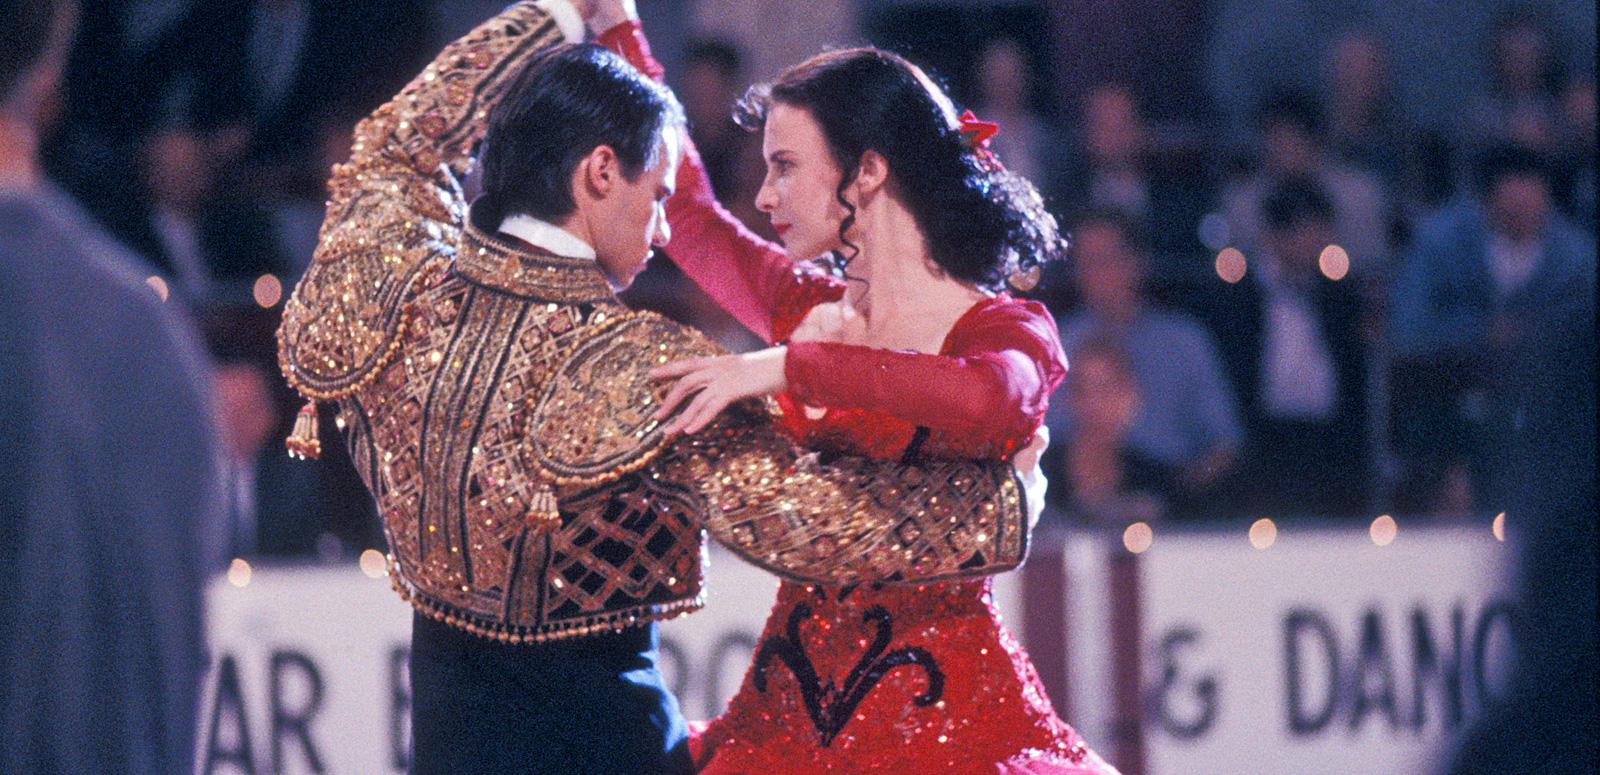 Paul Mercurio and Tara Morice in a scene from the film Strictly Ballroom. The are pictured from the waist up in a dancing pose and wearing Spanish-style costumes.